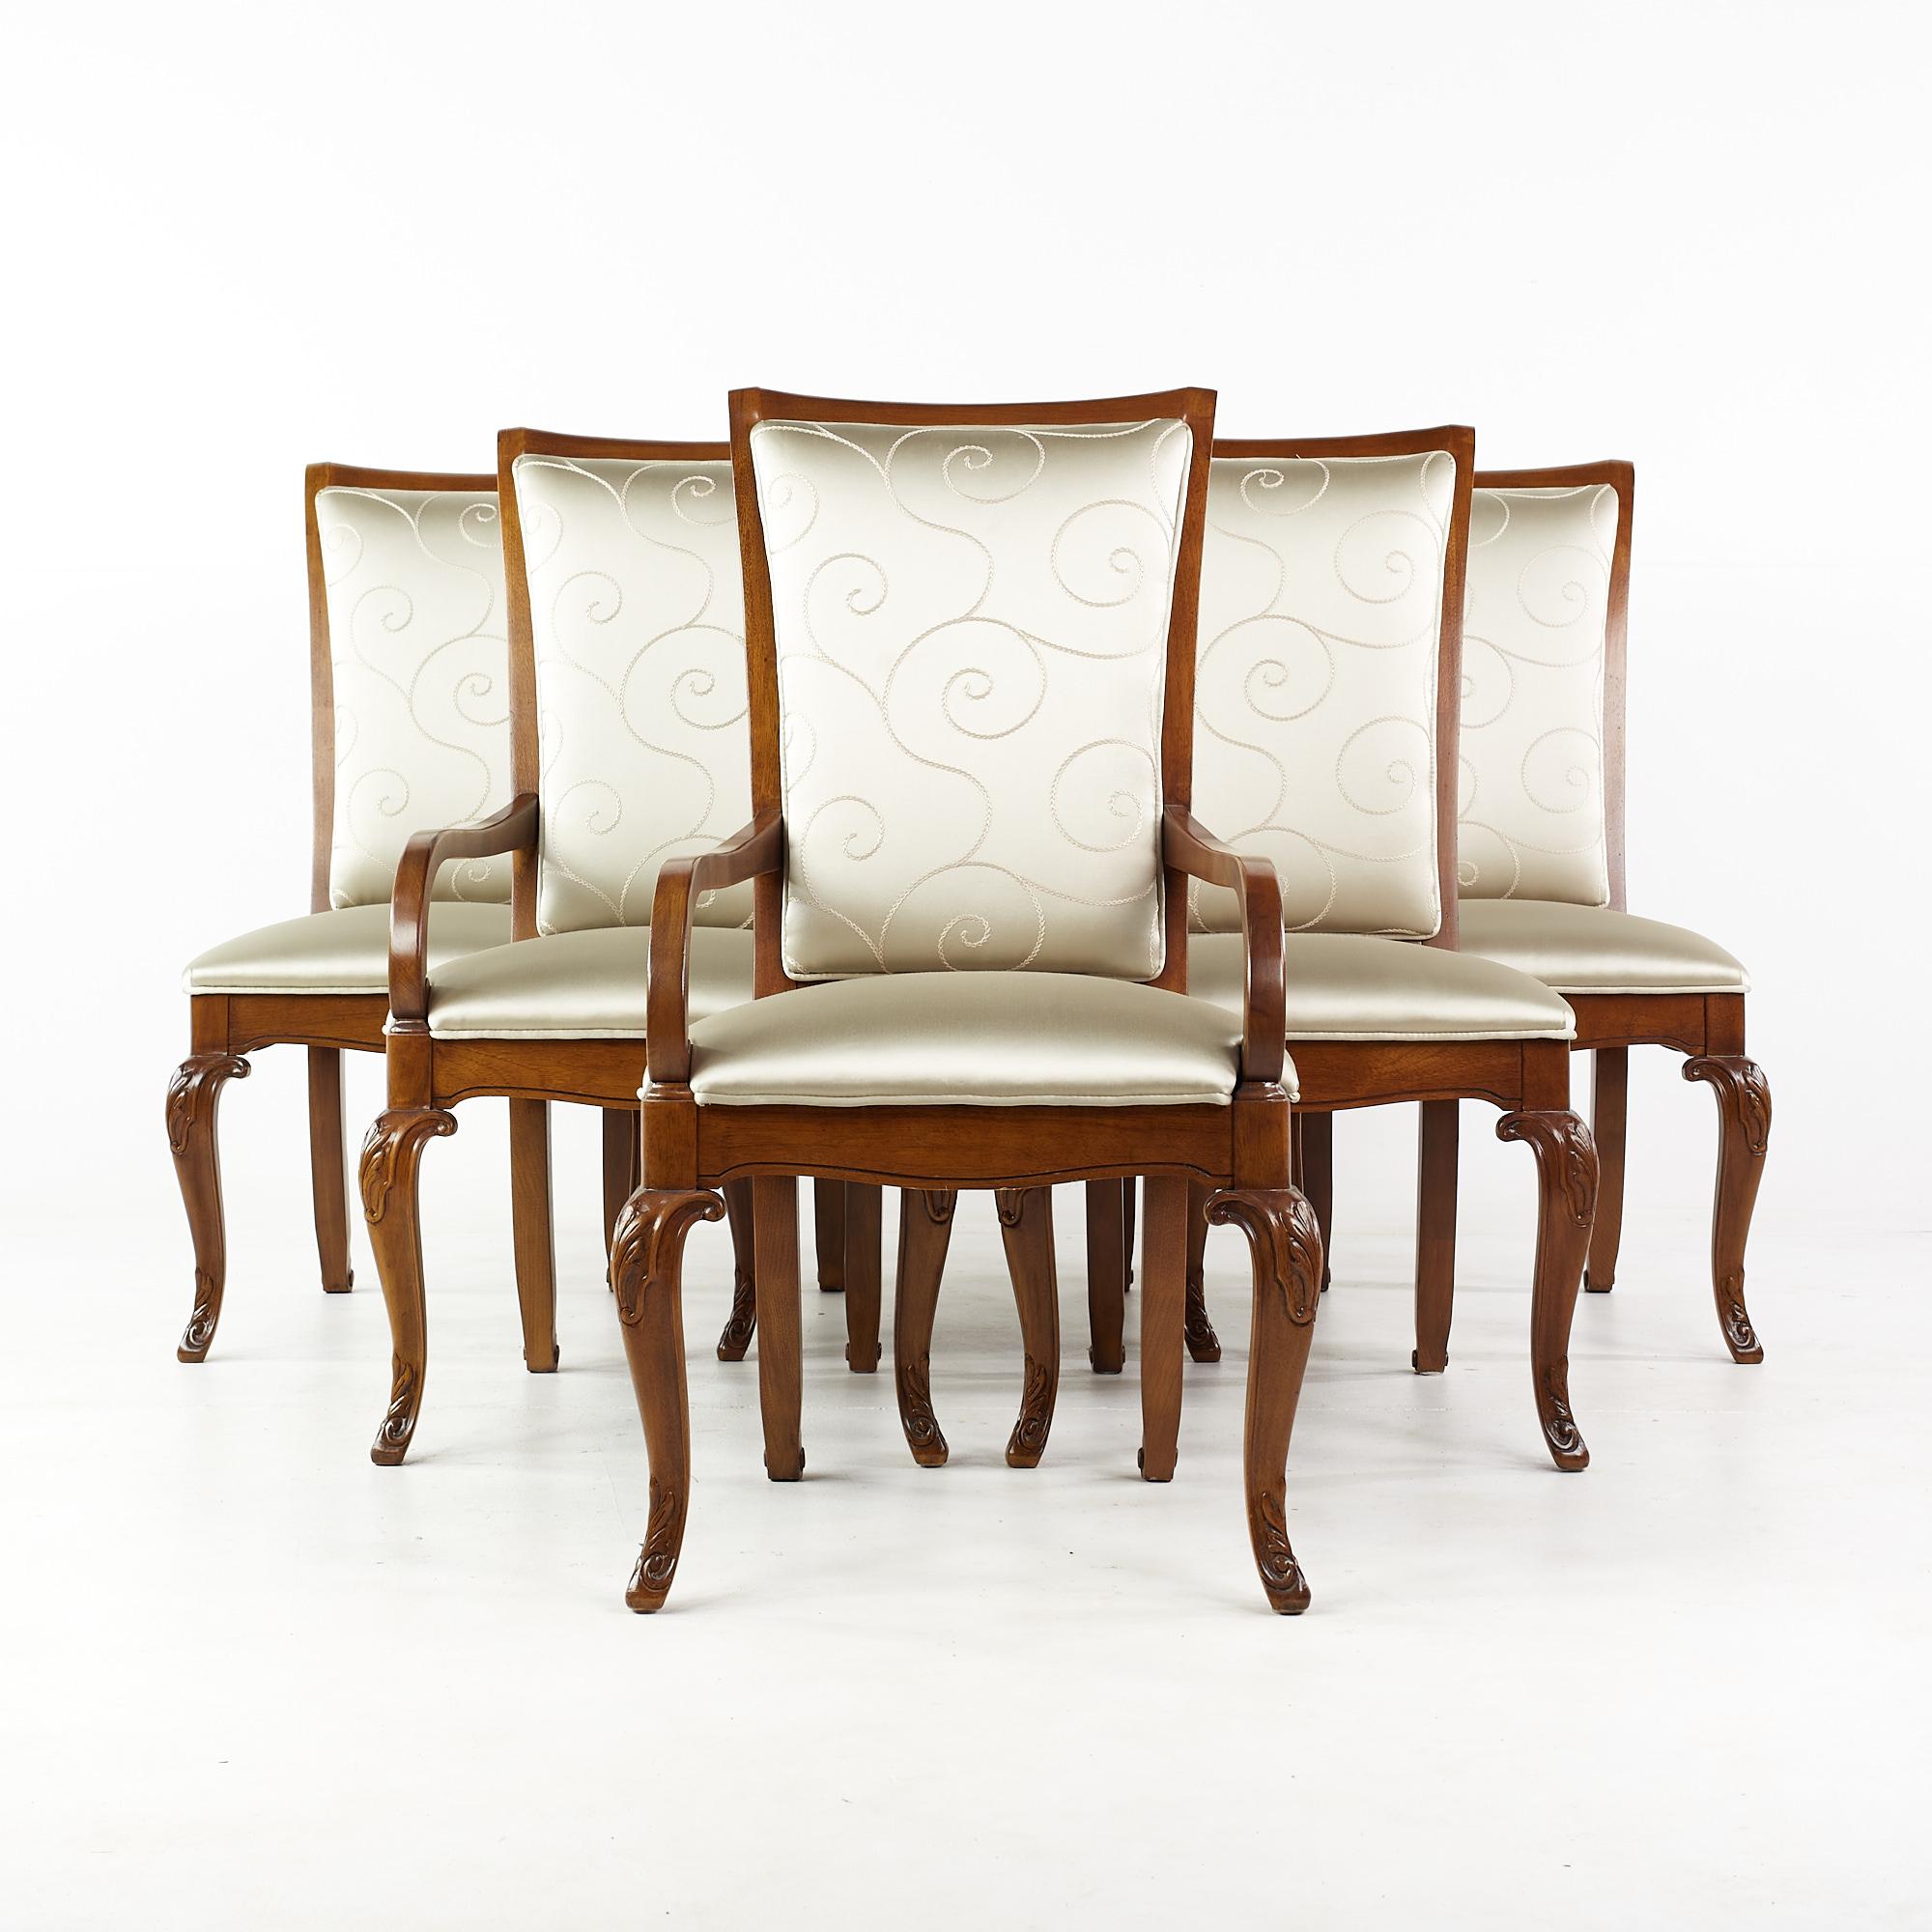 Thomasville walnut dining chairs - set of 6

Each armless chair measures: 23 wide x 27 deep x 42 high, with a seat height of 18 inches.
Each captains chair measures: 23 wide x 27 deep x 42 high, with a seat height of 18 inches, the arm